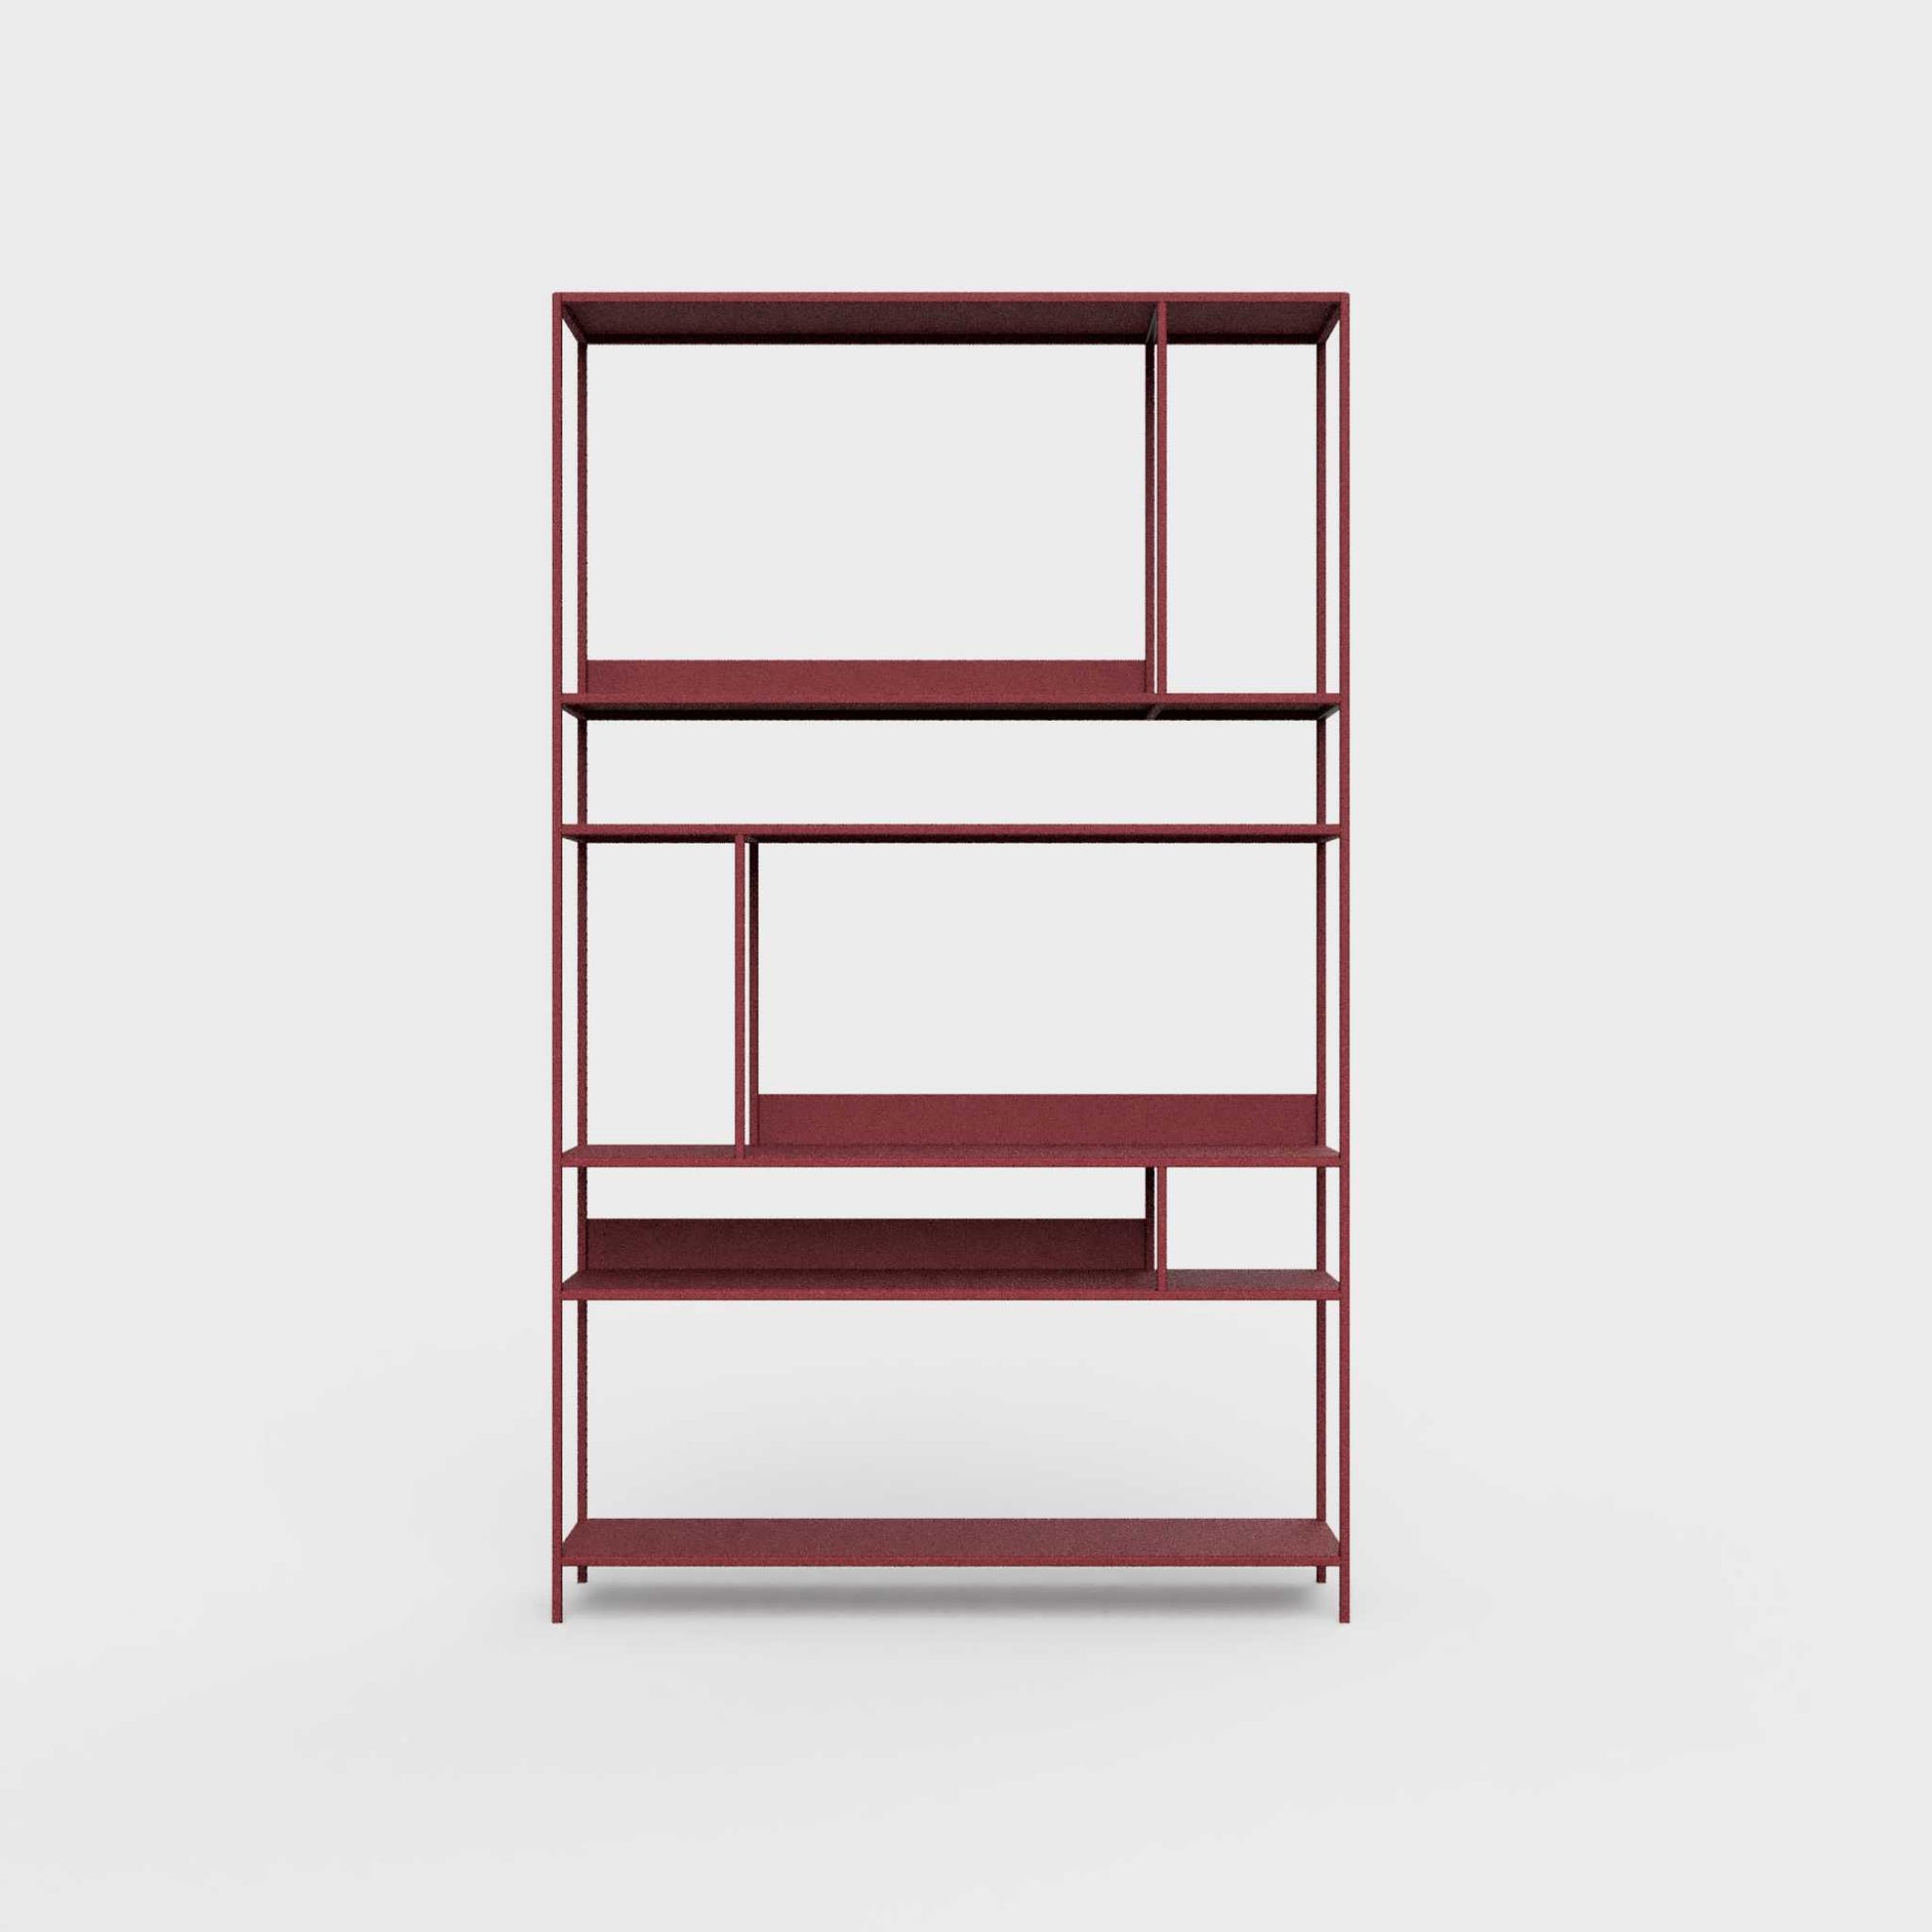 ÉTAUDORÉ Floks 01 powder coated steel bookcase in ruby red